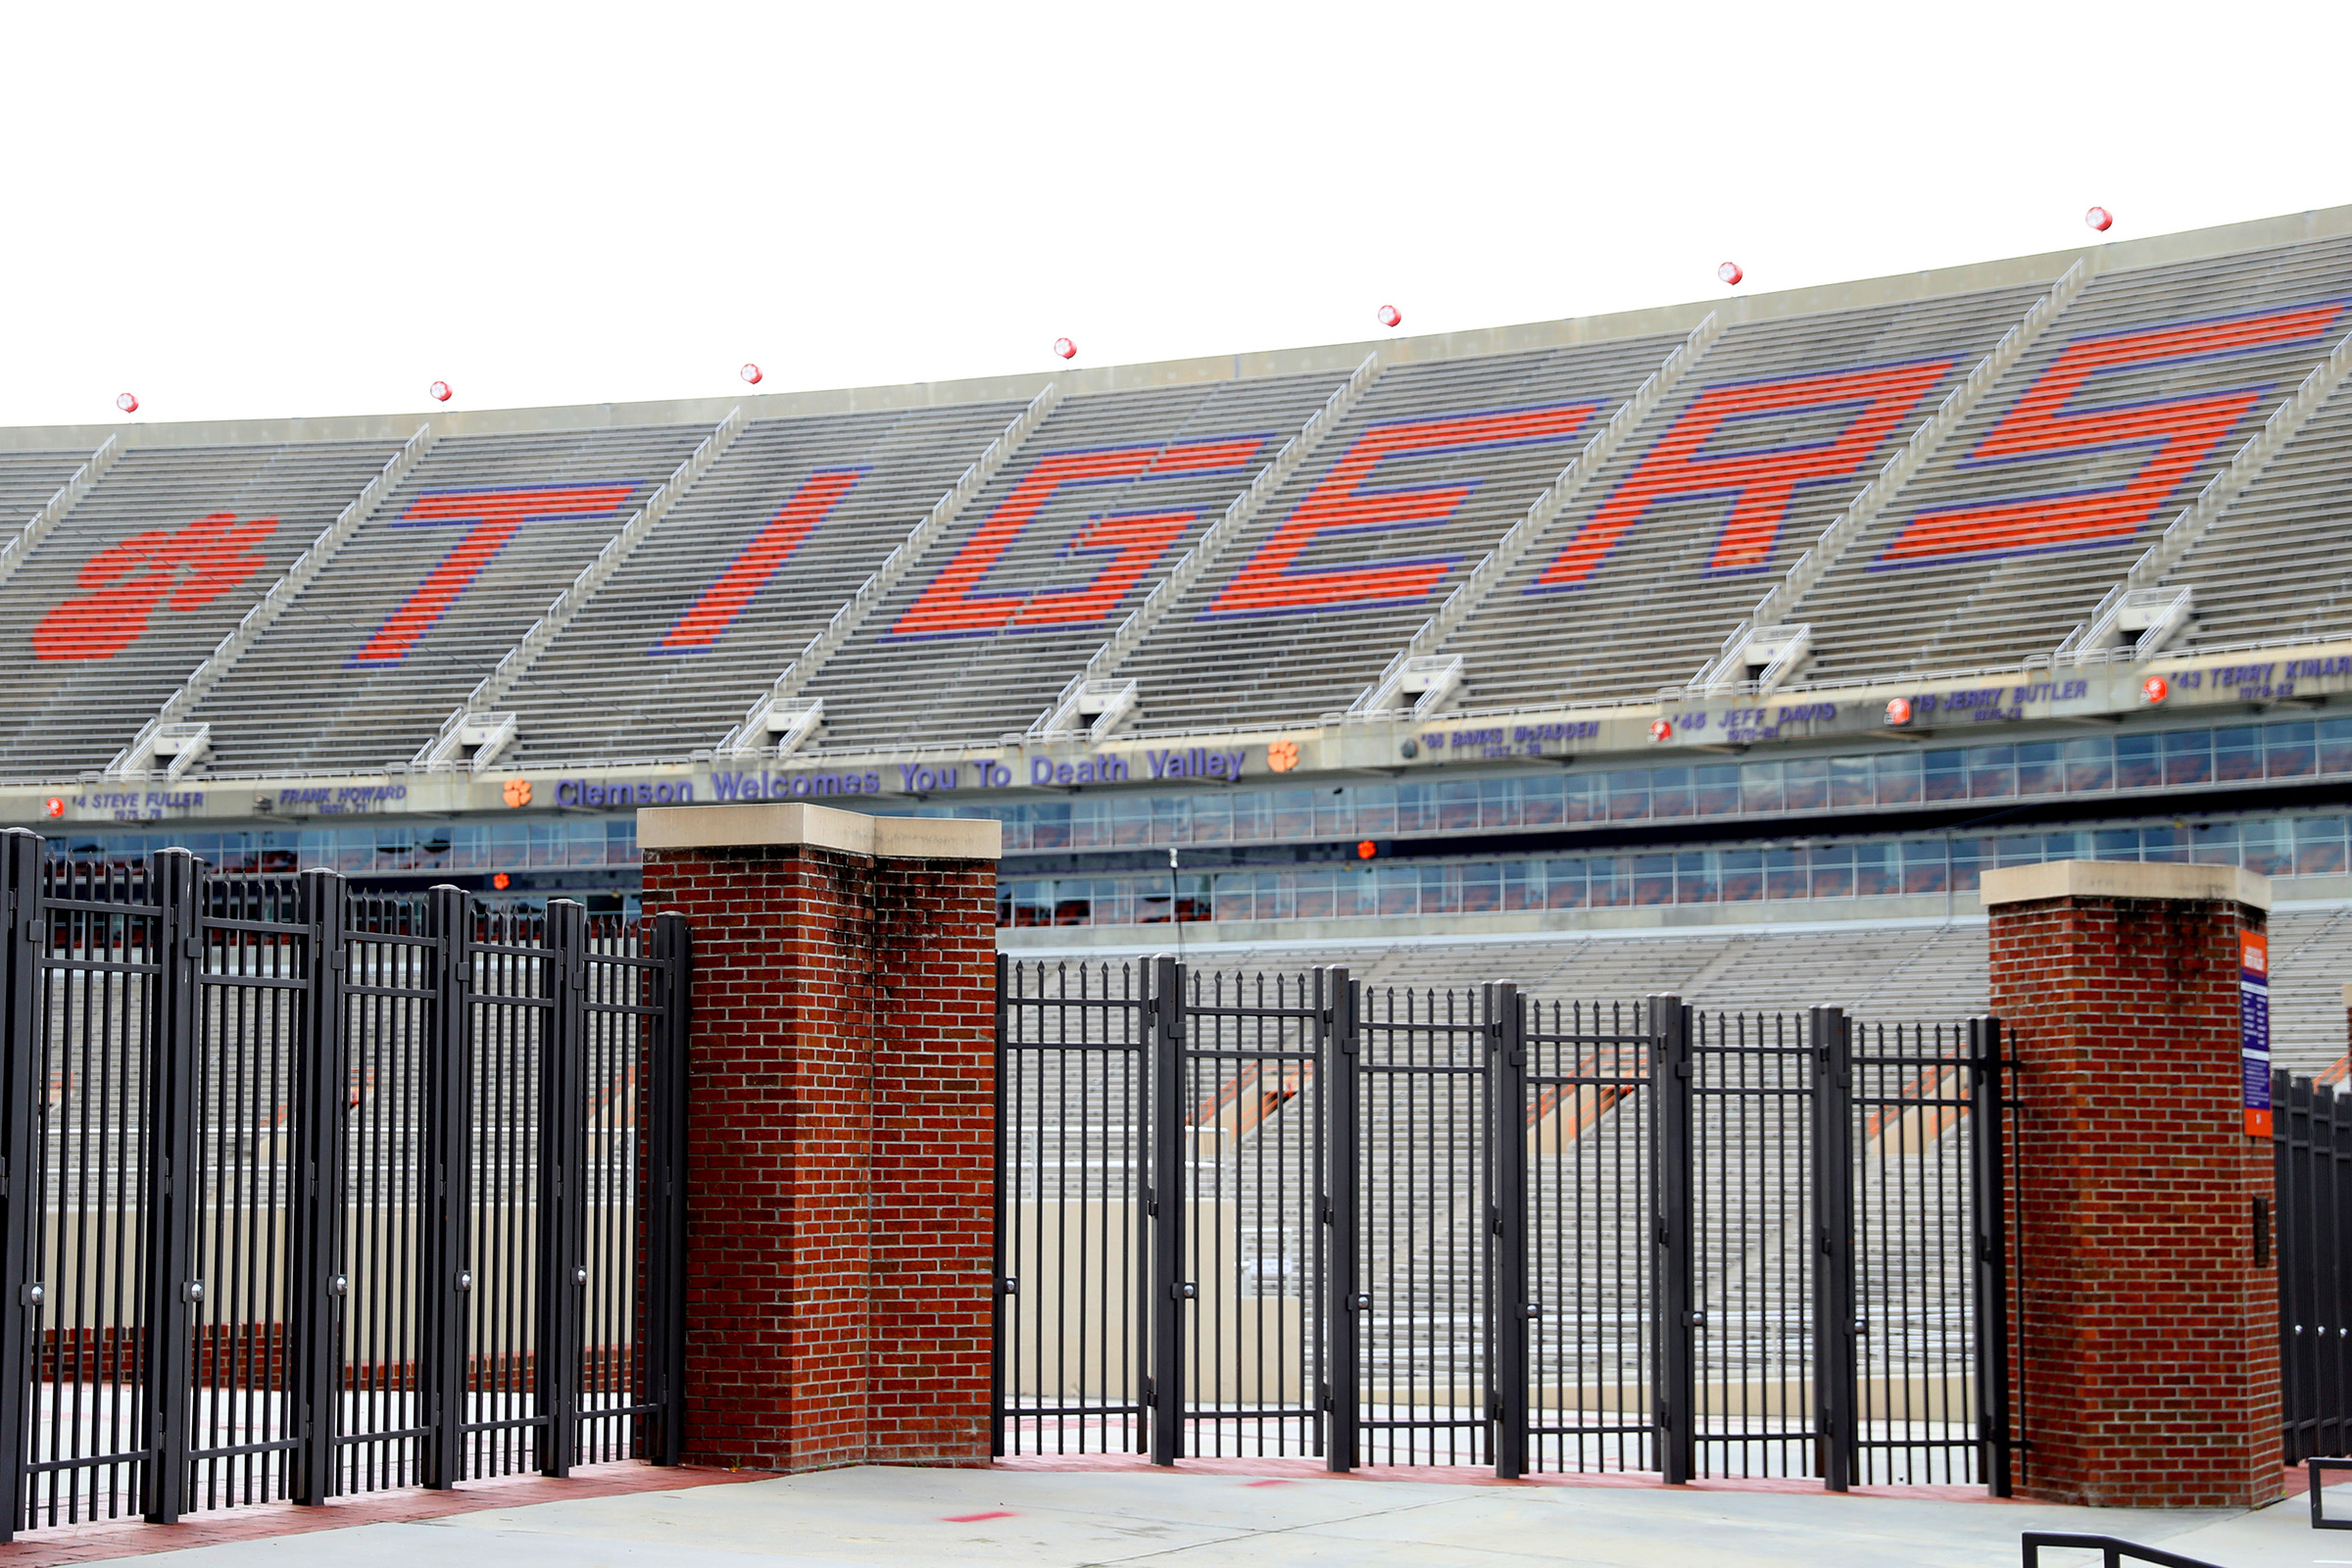 A view empty stands inside of Clemson Memorial Stadium on the campus of Clemson University on June 10, 2020 in Clemson, South Carolina. The campus remains open in a limited capacity due to the Coronavirus (COVID-19) pandemic. (Maddie Meyer—Getty Images)